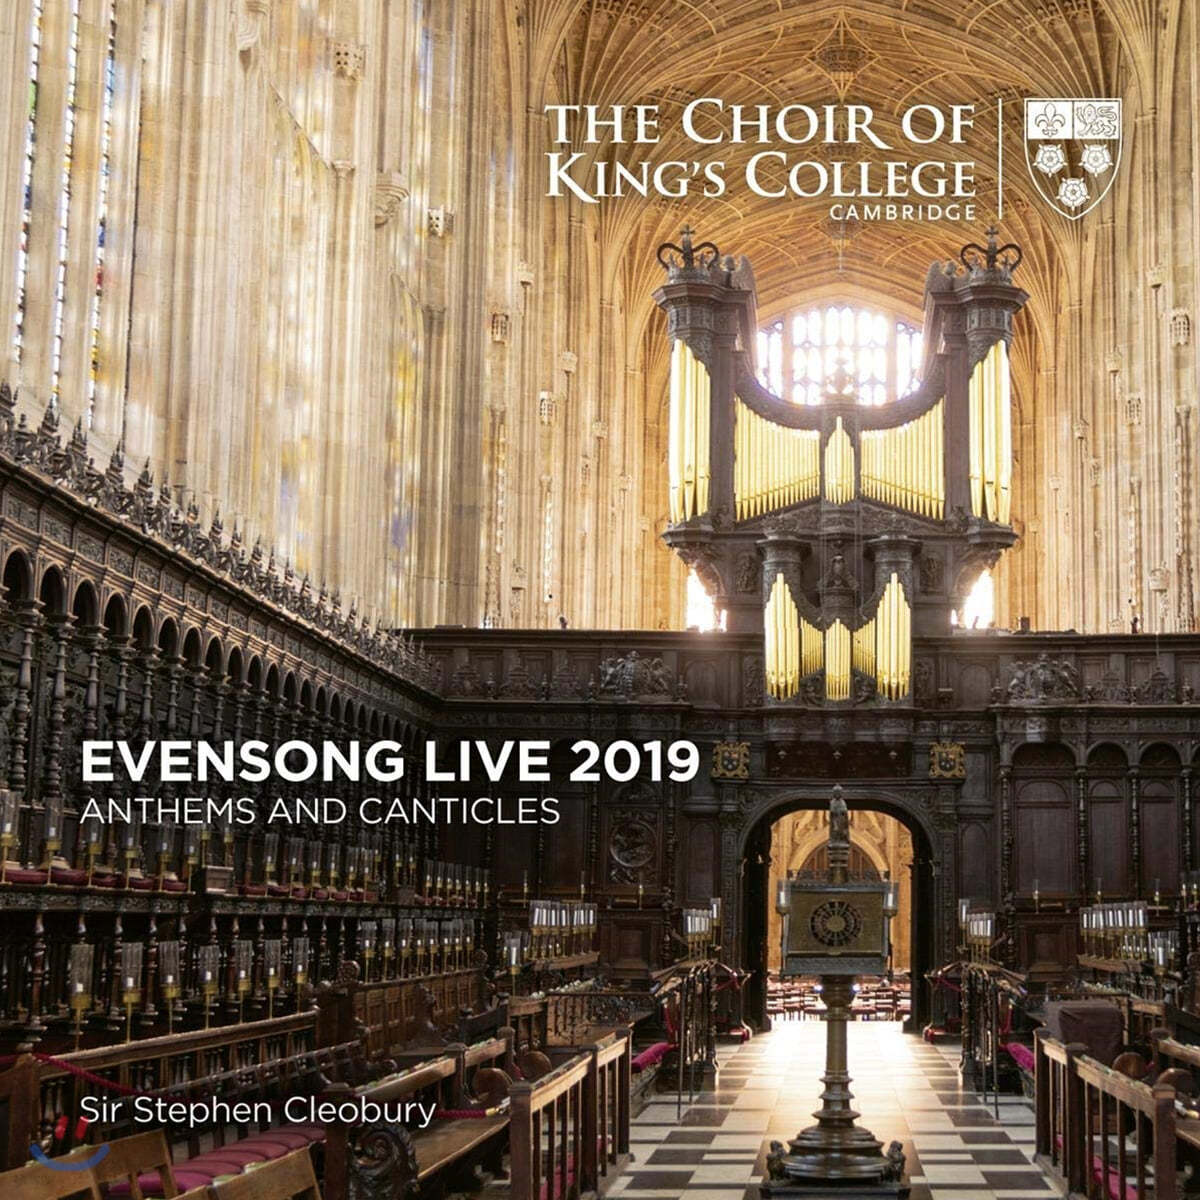 Choir of King&#39;s College Cambridge 캠브리지 킹스 칼리지 합창단 이븐 송 라이브 2019 (Evensong Live 2019: Anthems and Canticles)